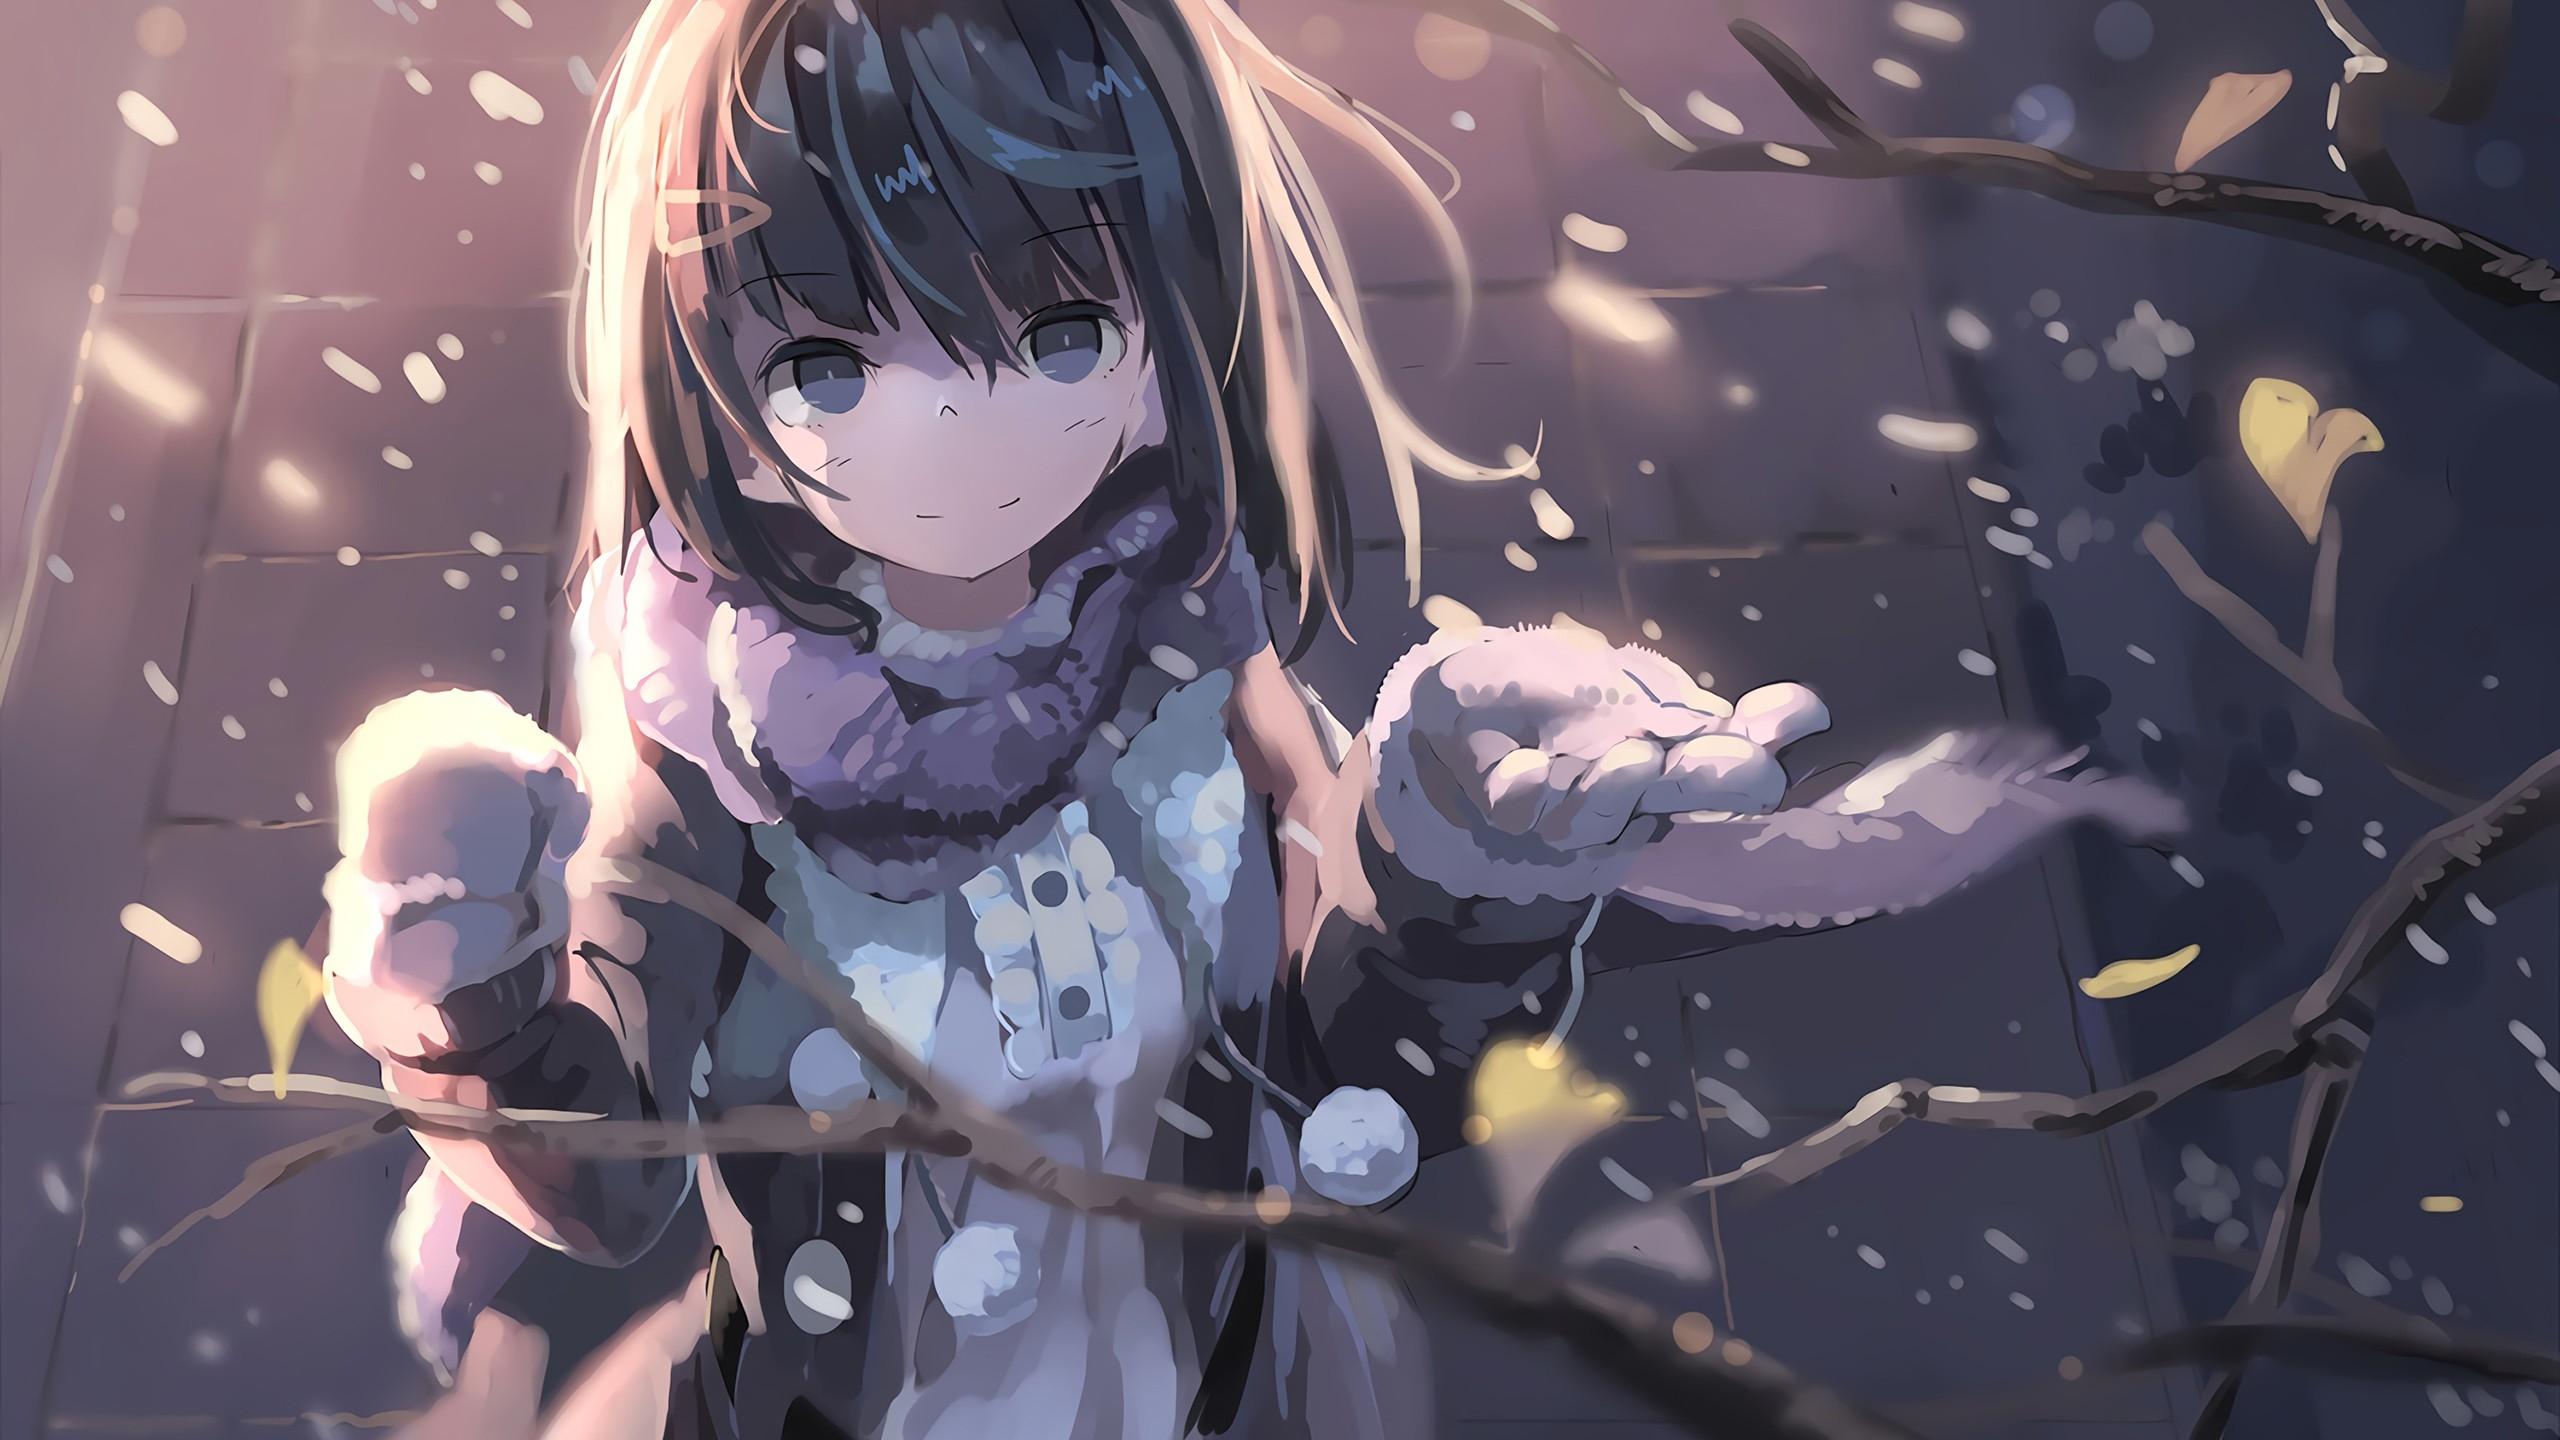 Download 2560x1440 Anime Girl, Scarf, Snow, Winter, Short Hair Wallpaper for iMac 27 inch